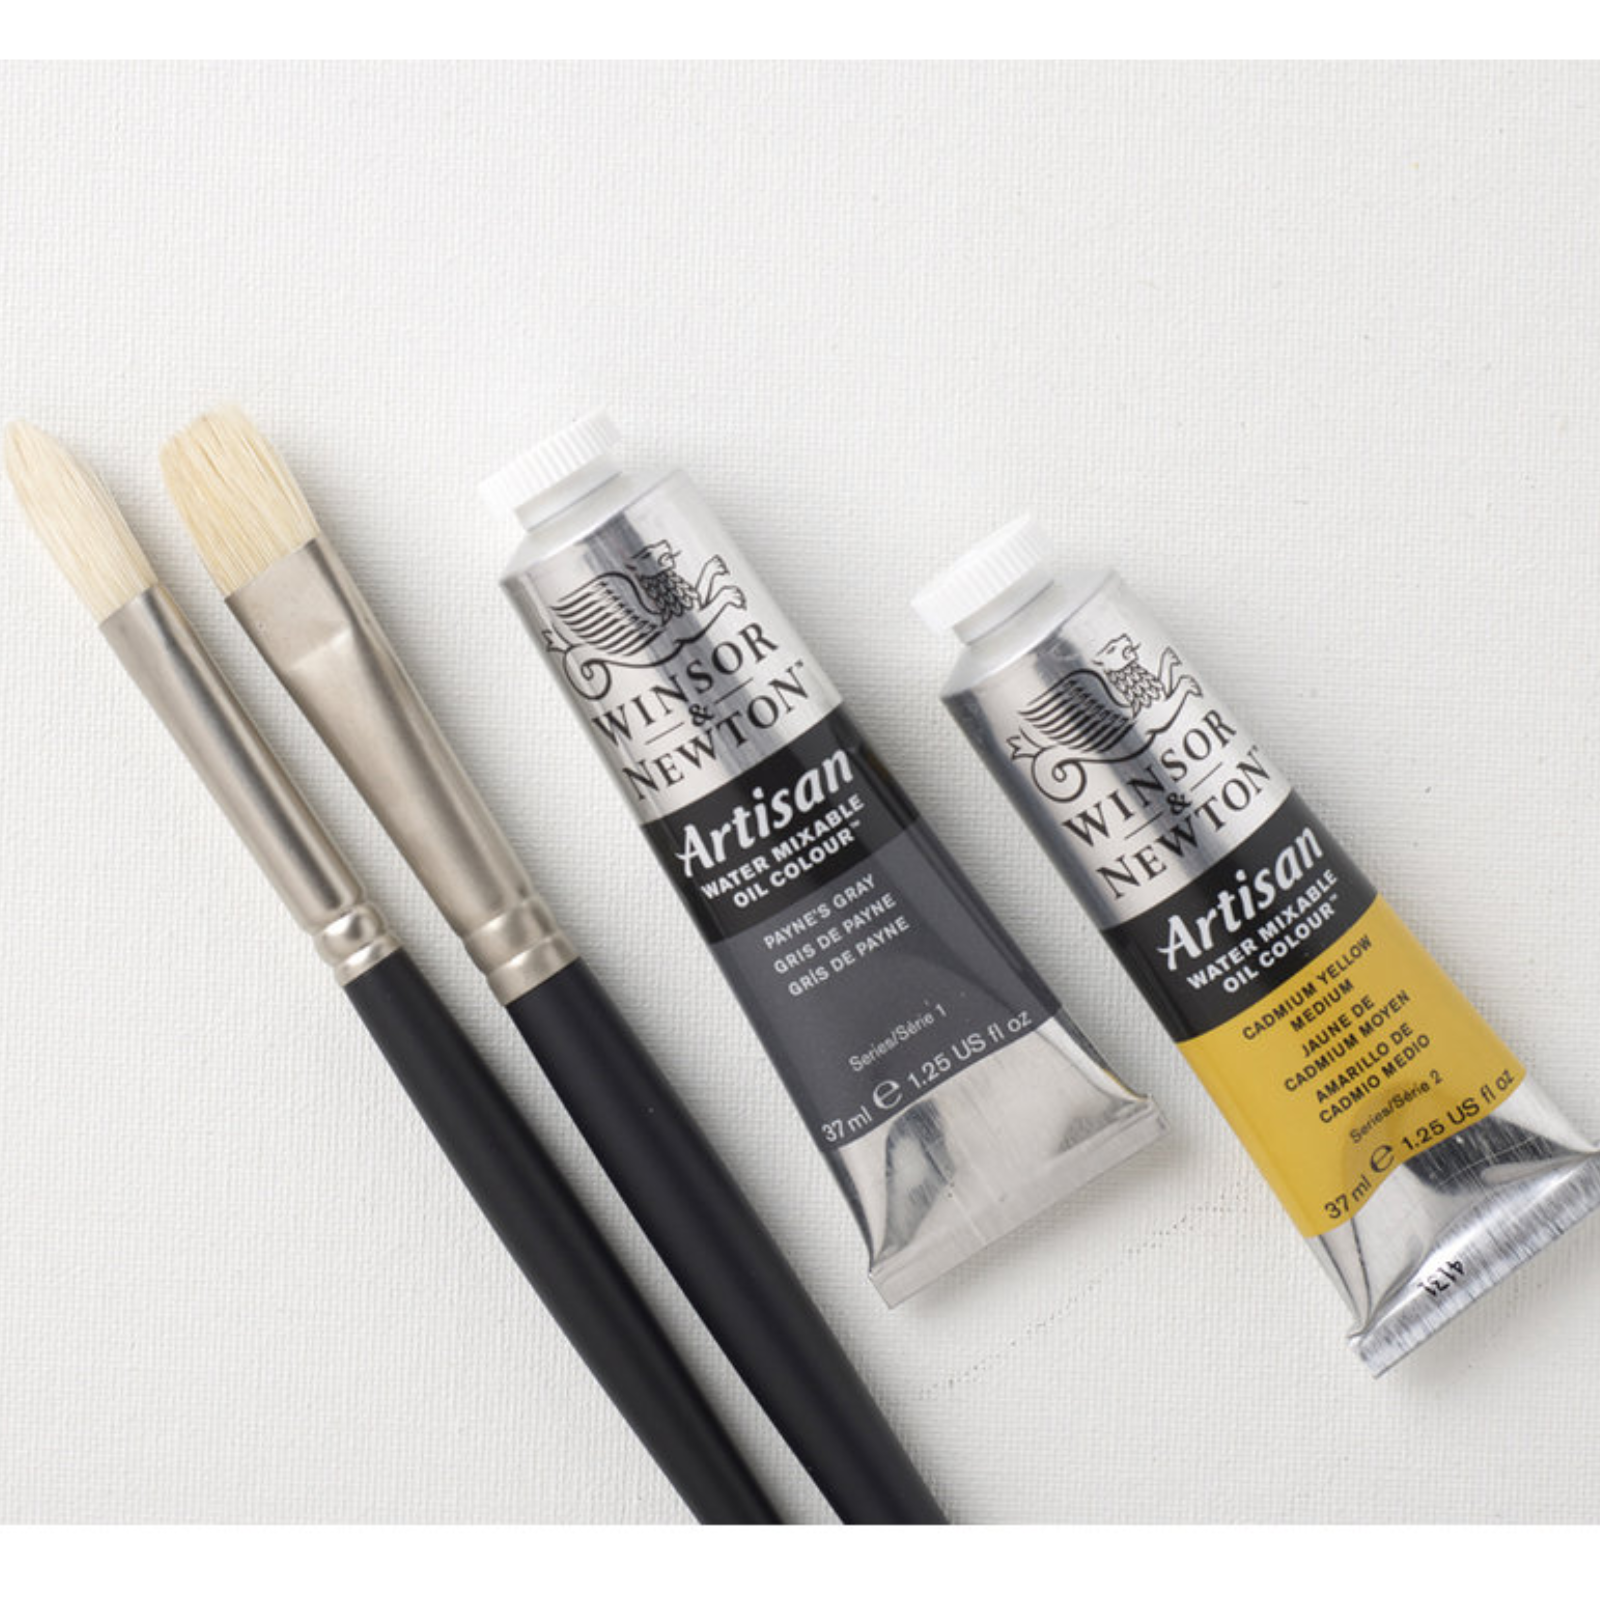 Winsor & Newton Artisan Water Mixable Oil Colour Set - perfect for a beginner who needs a place to start